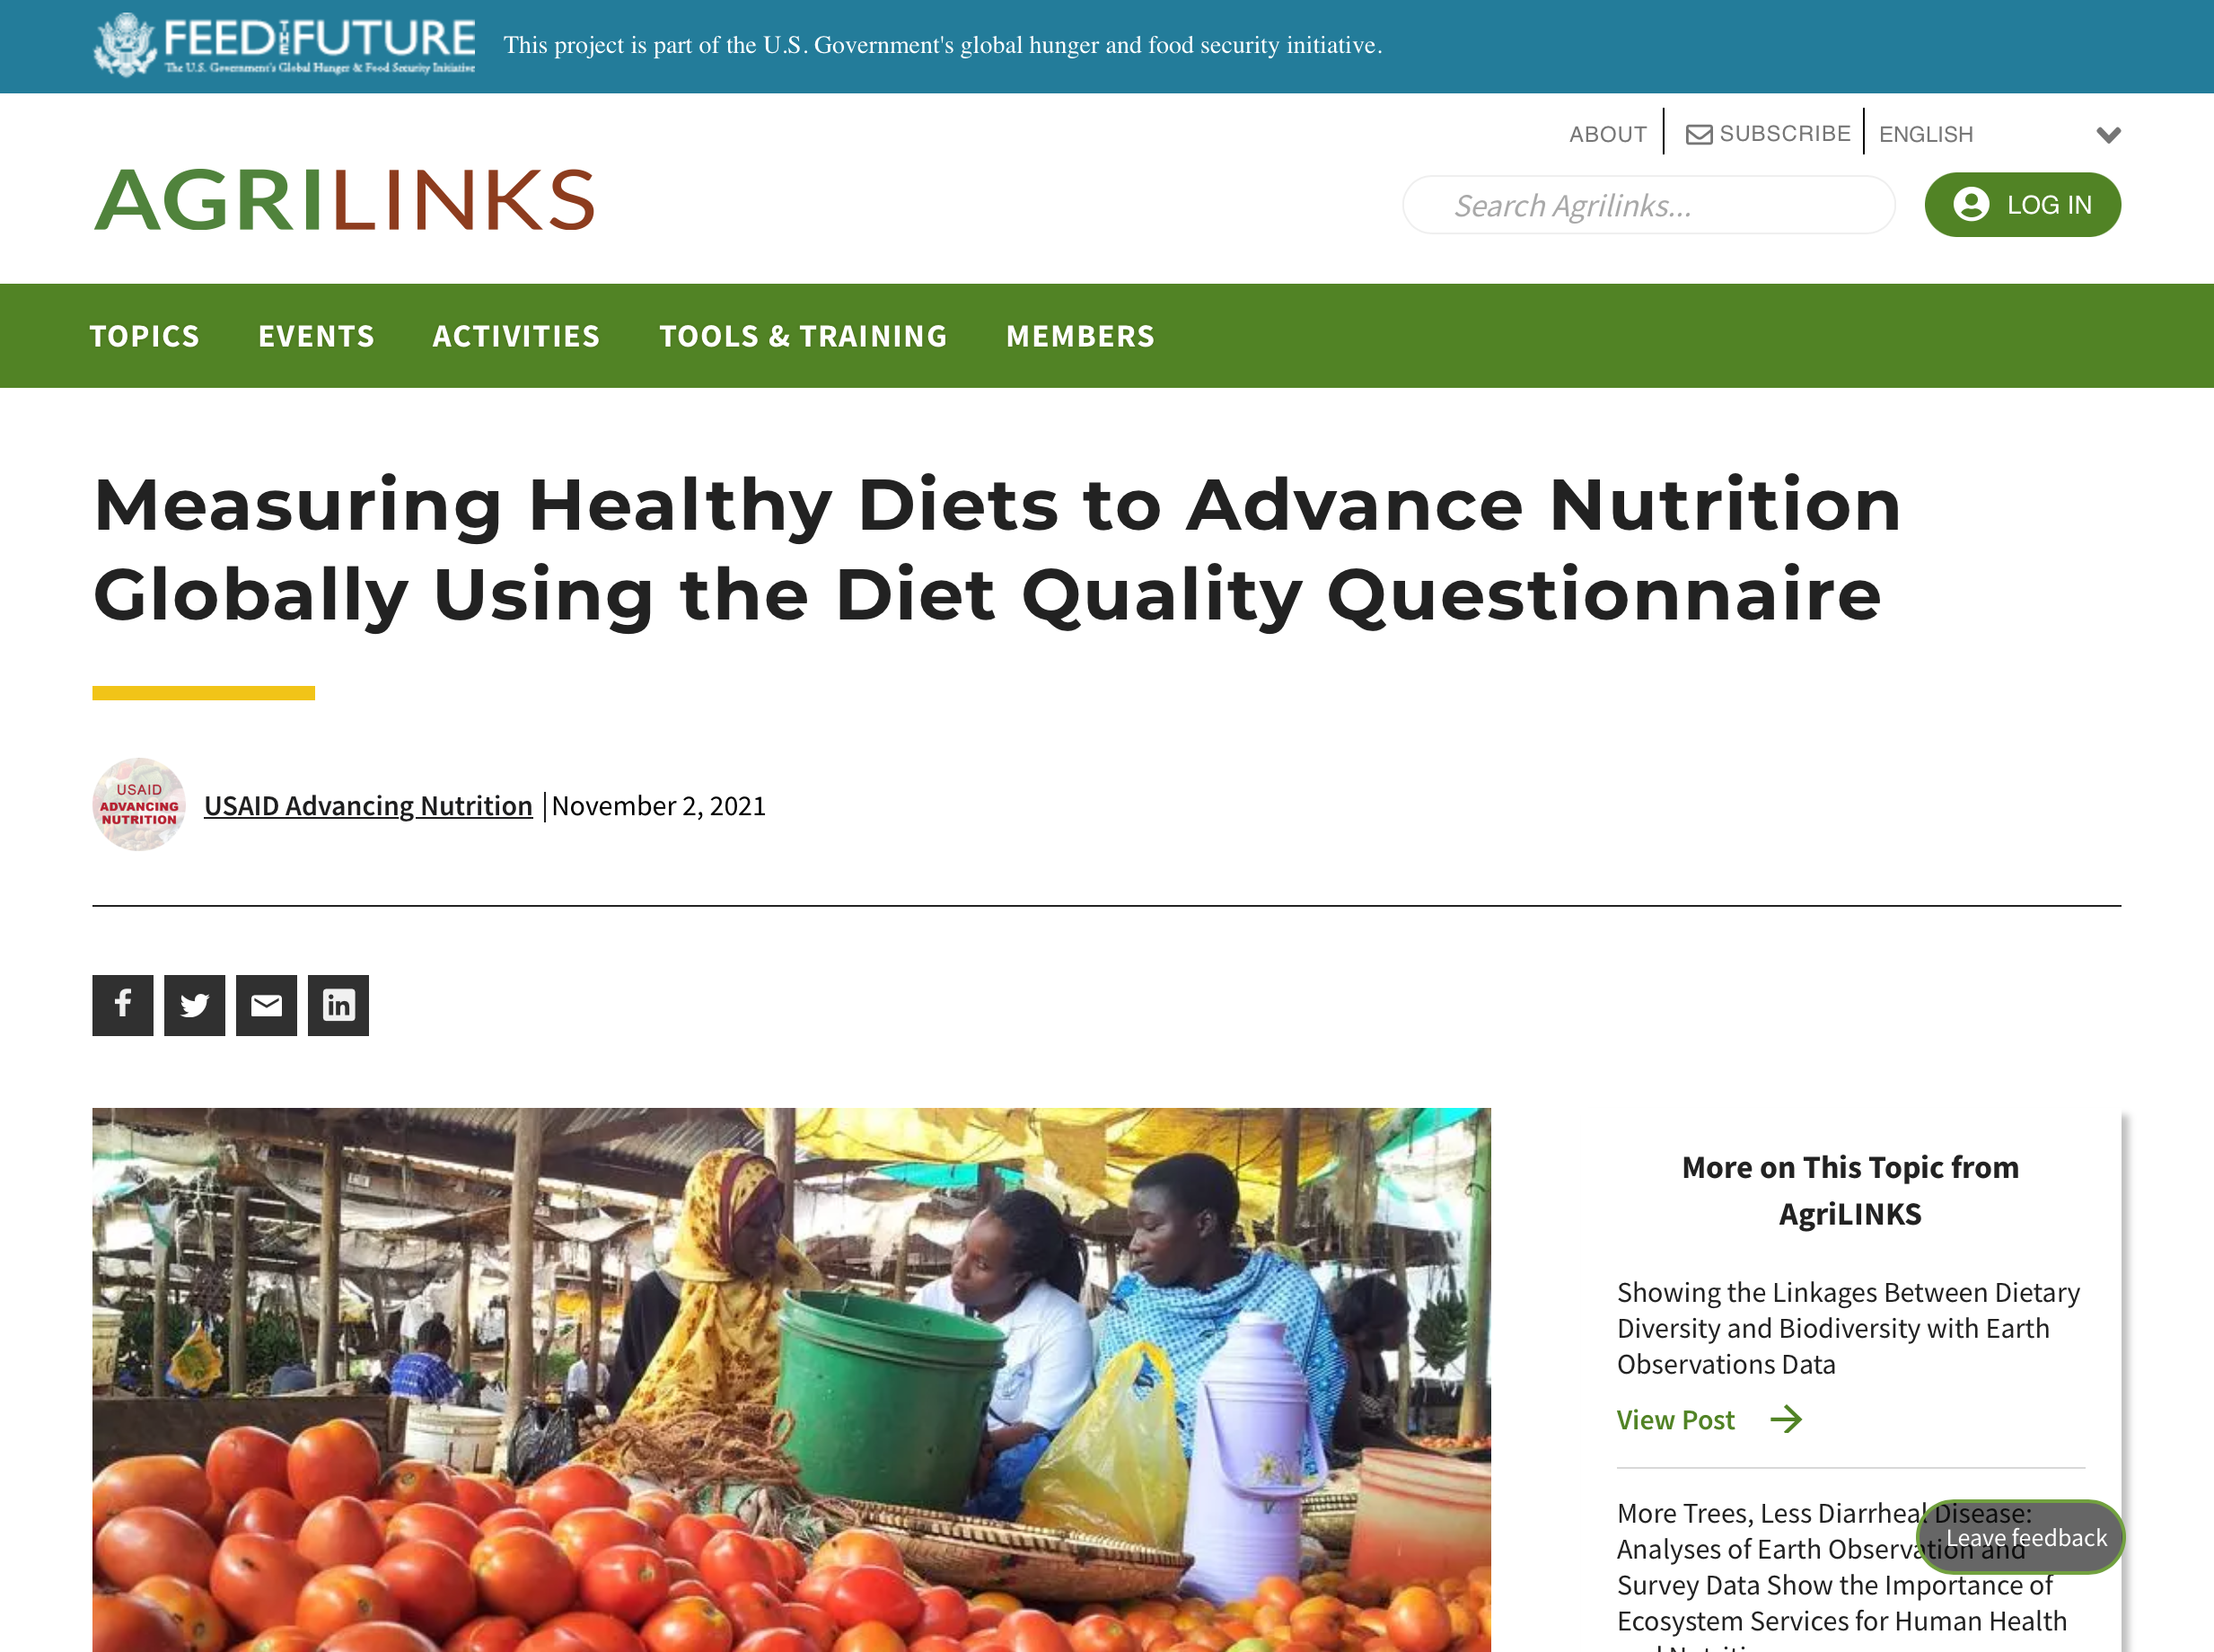 Measuring Healthy Diets to Advance Nutrition Globally Using the Diet Quality Questionnaire